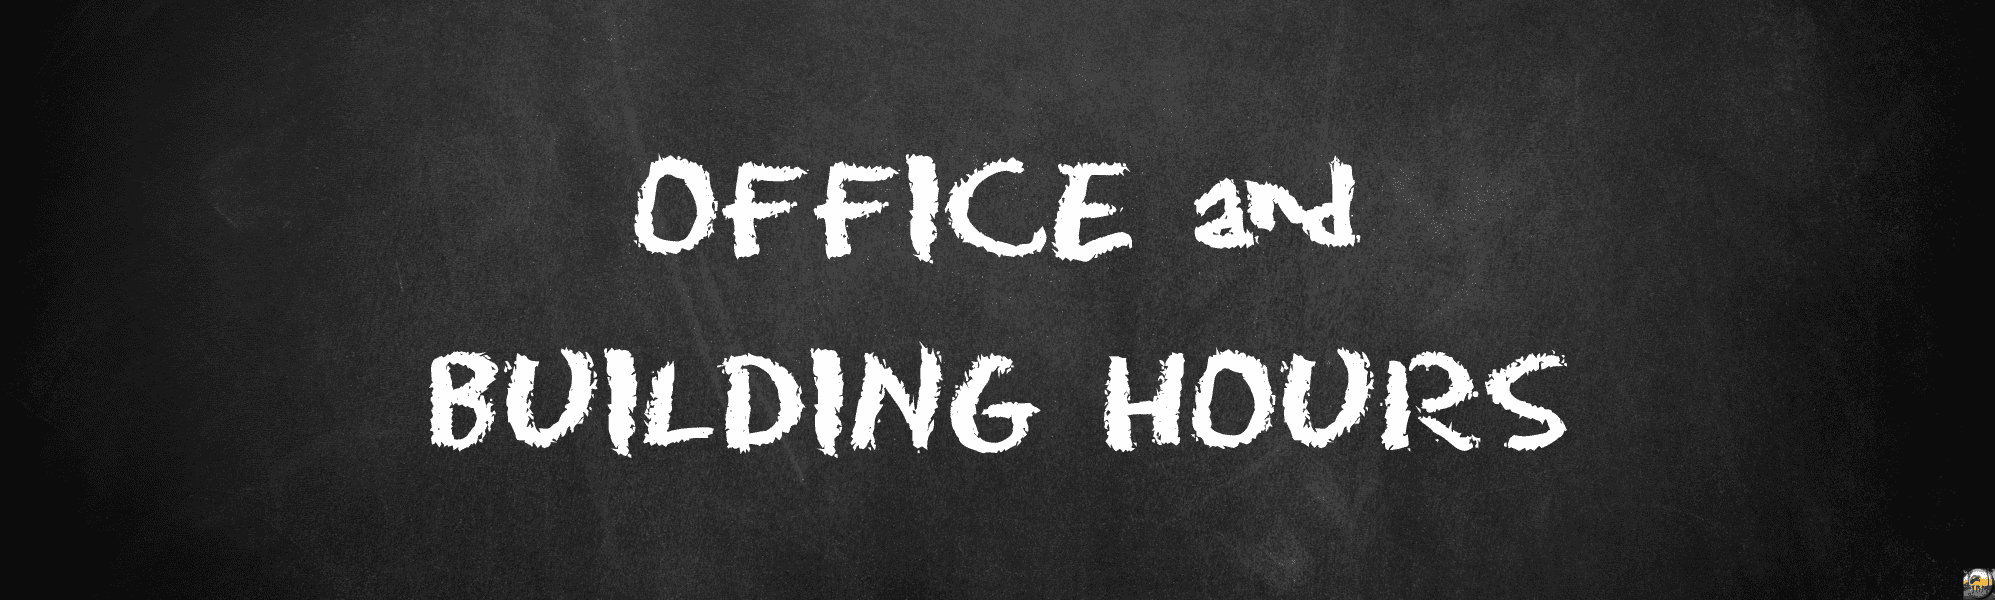 <span class="dojodigital_toggle_title">Office and Building Hours</span>